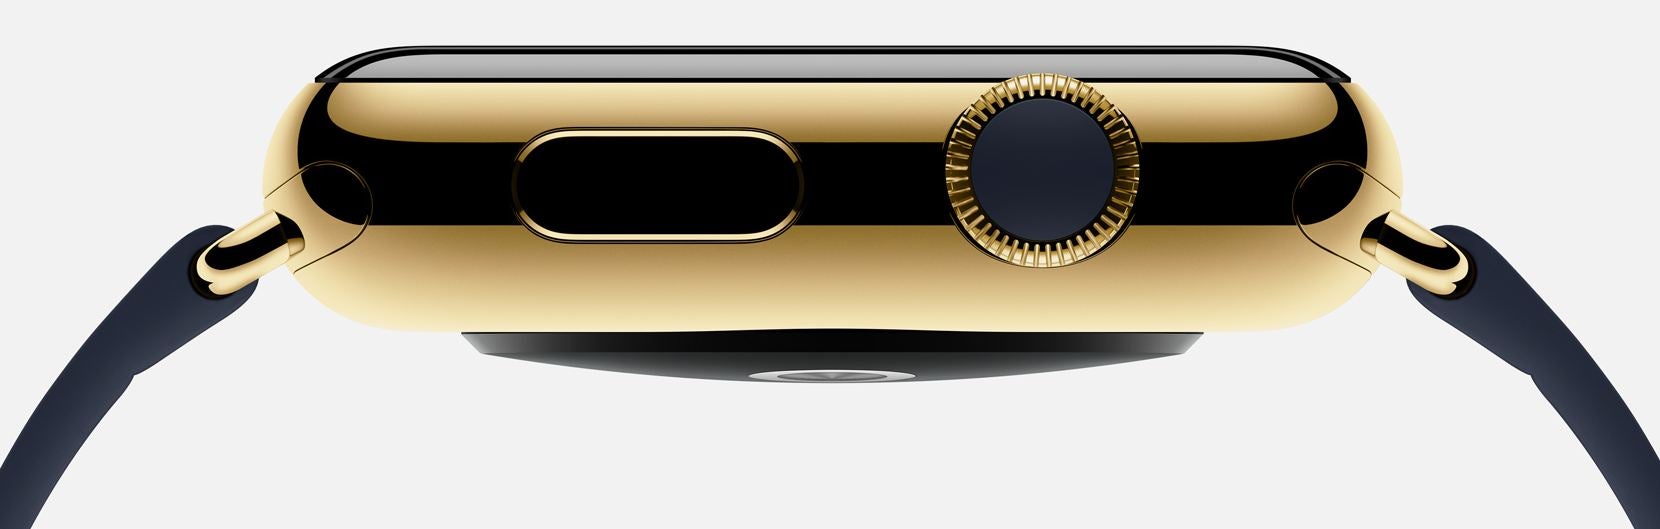 The Apple Watch Edition